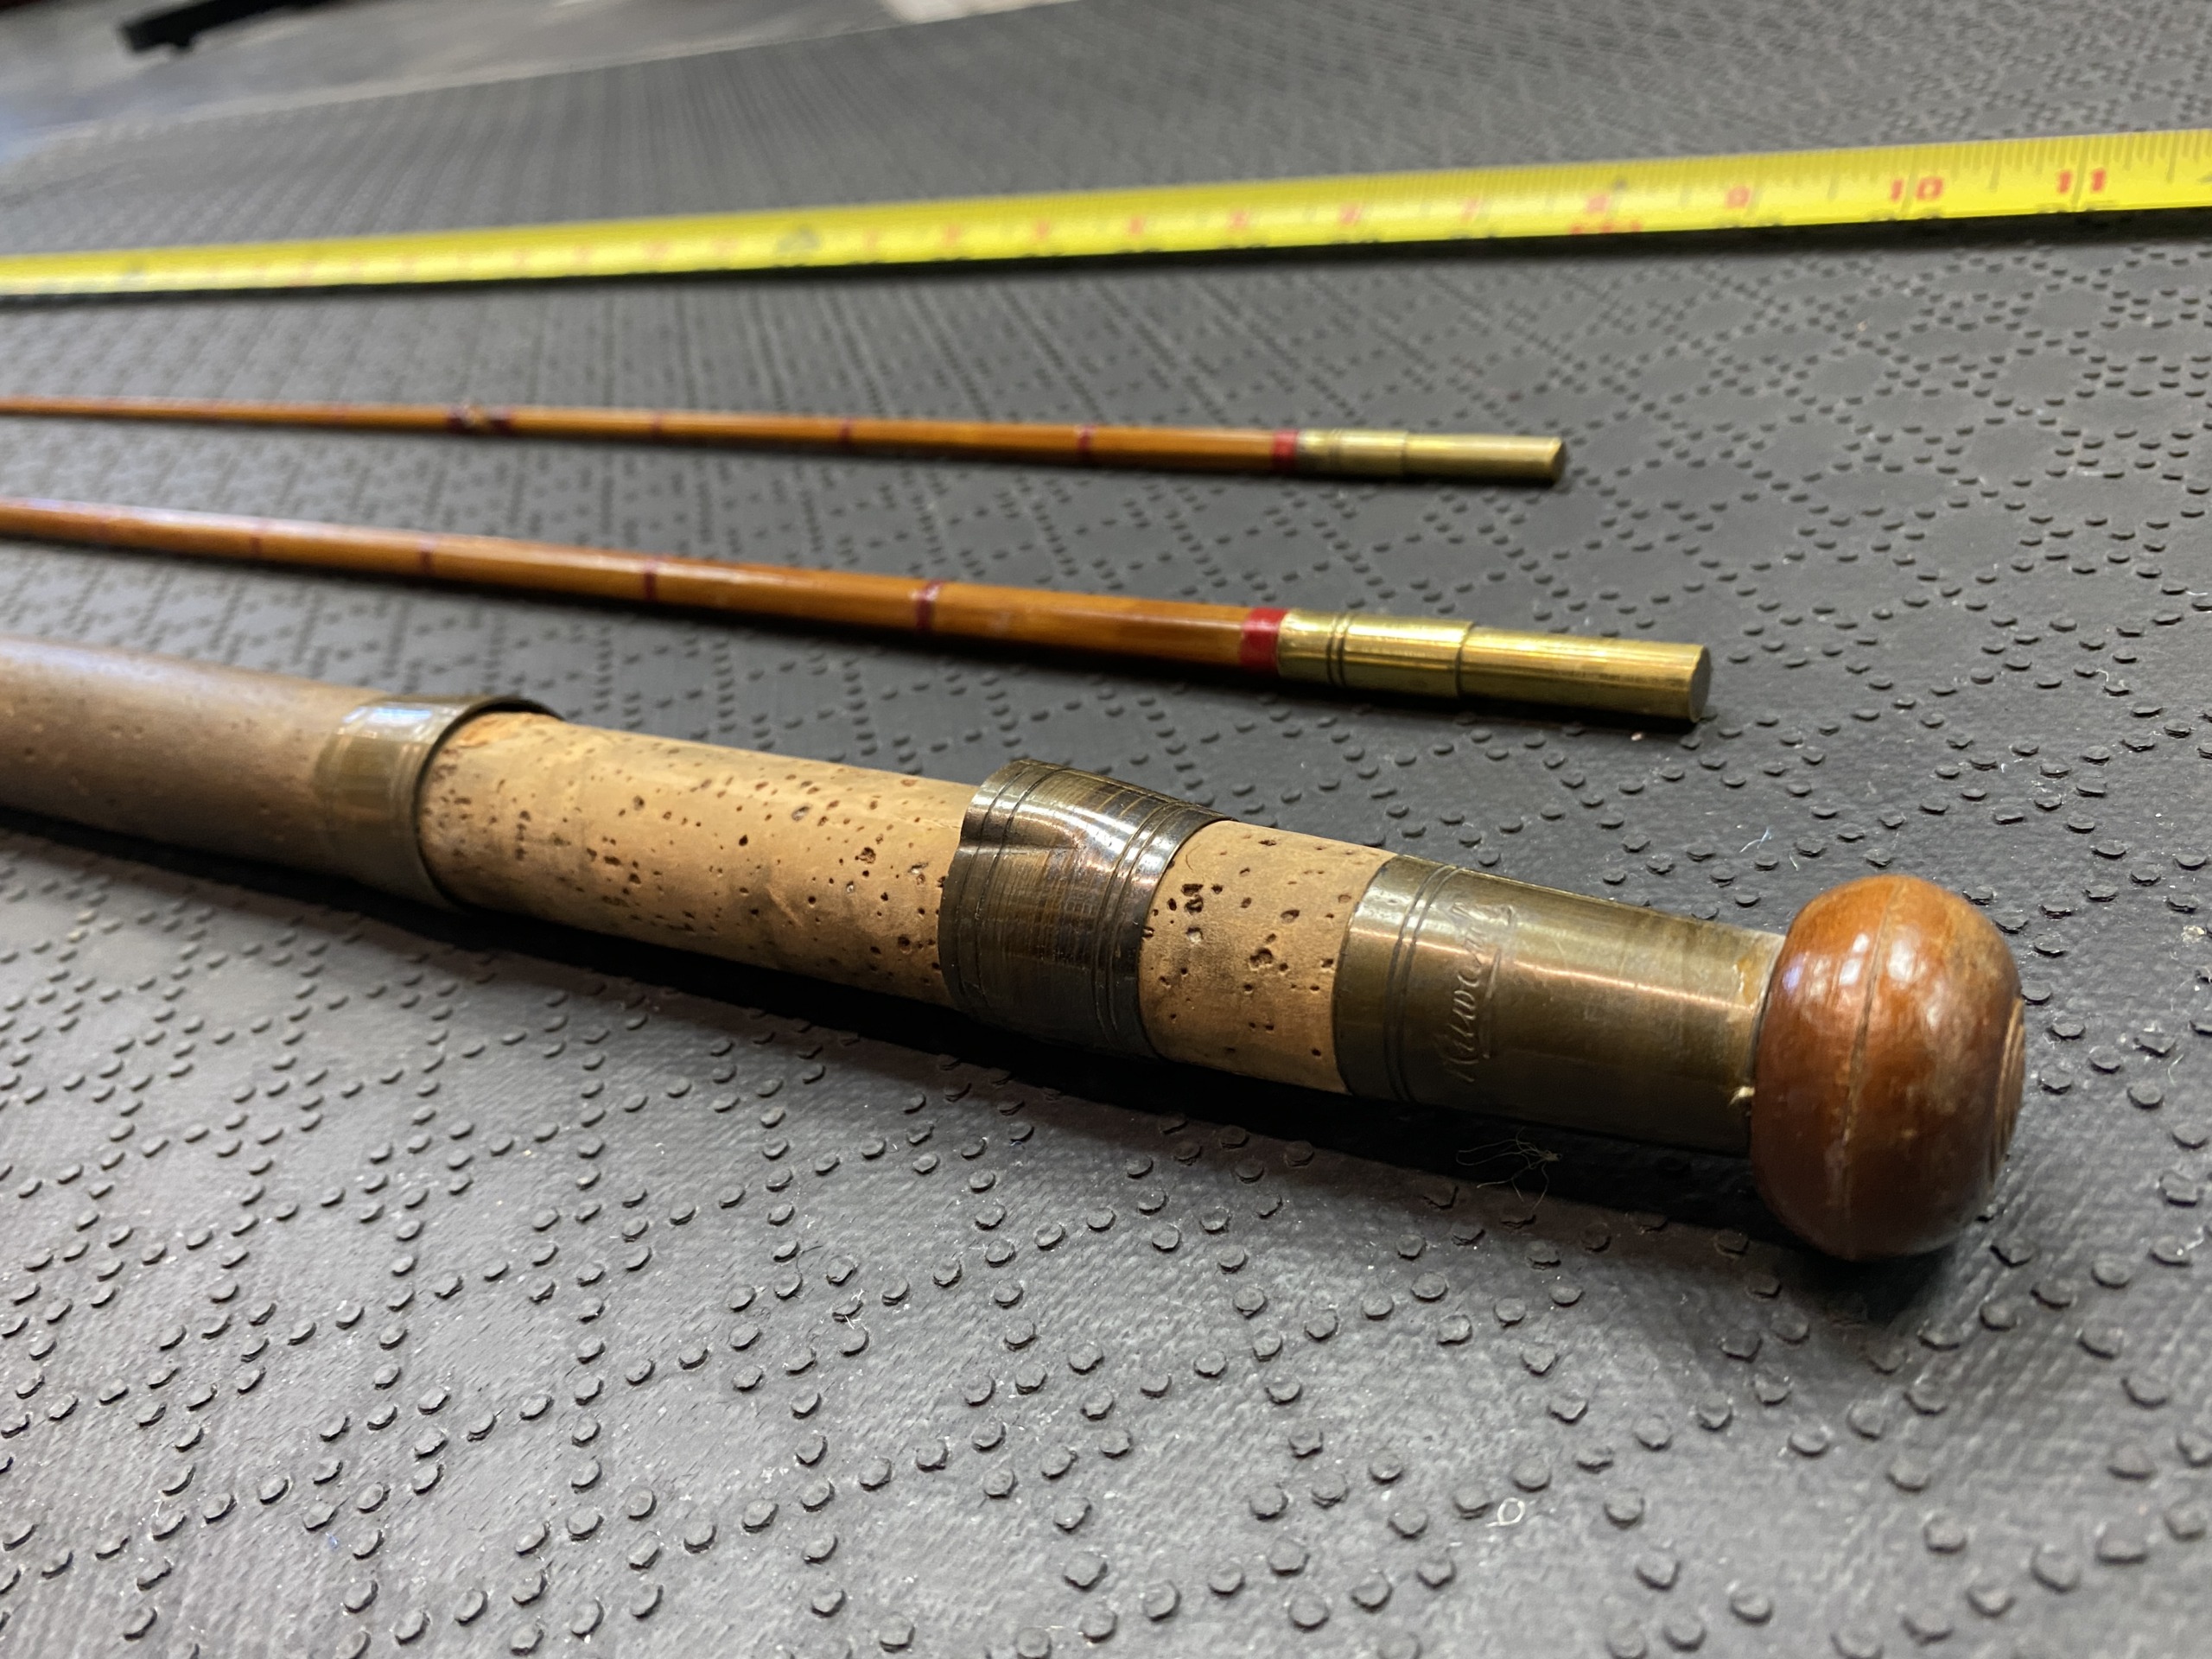 Vintage Fly Fishing Rod Kit, Bamboo Fly Fishing Boxed Kit, Very Good  Condition, 1940's Original Fly Rod Kit and Wooden Case Looks Unused -   India